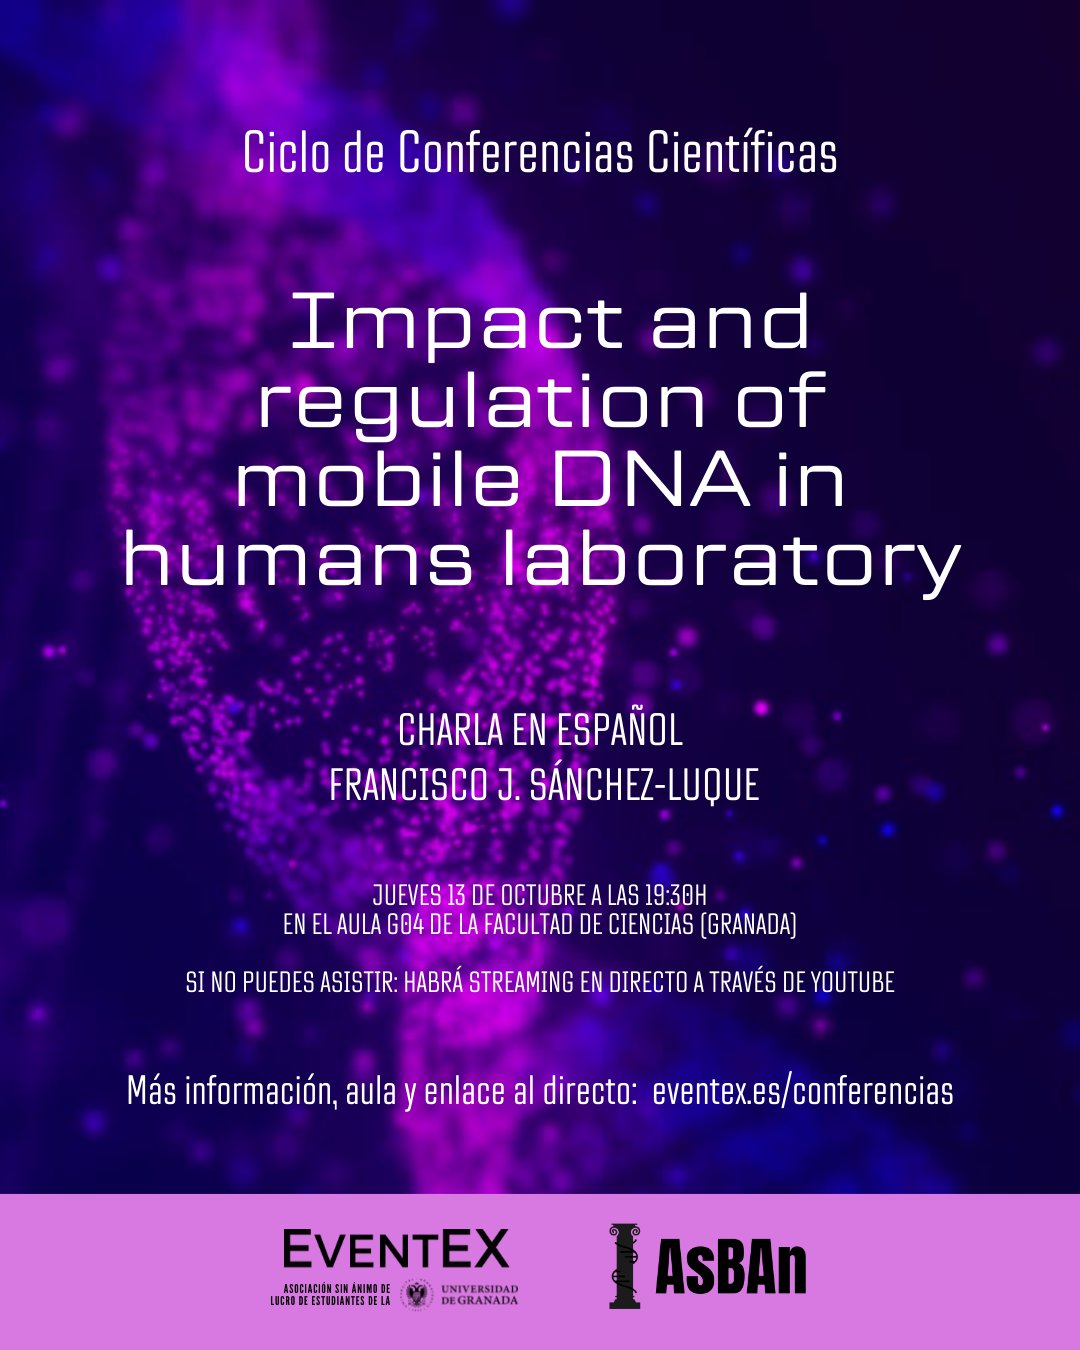 Impact and regulation of mobile DNA in humans